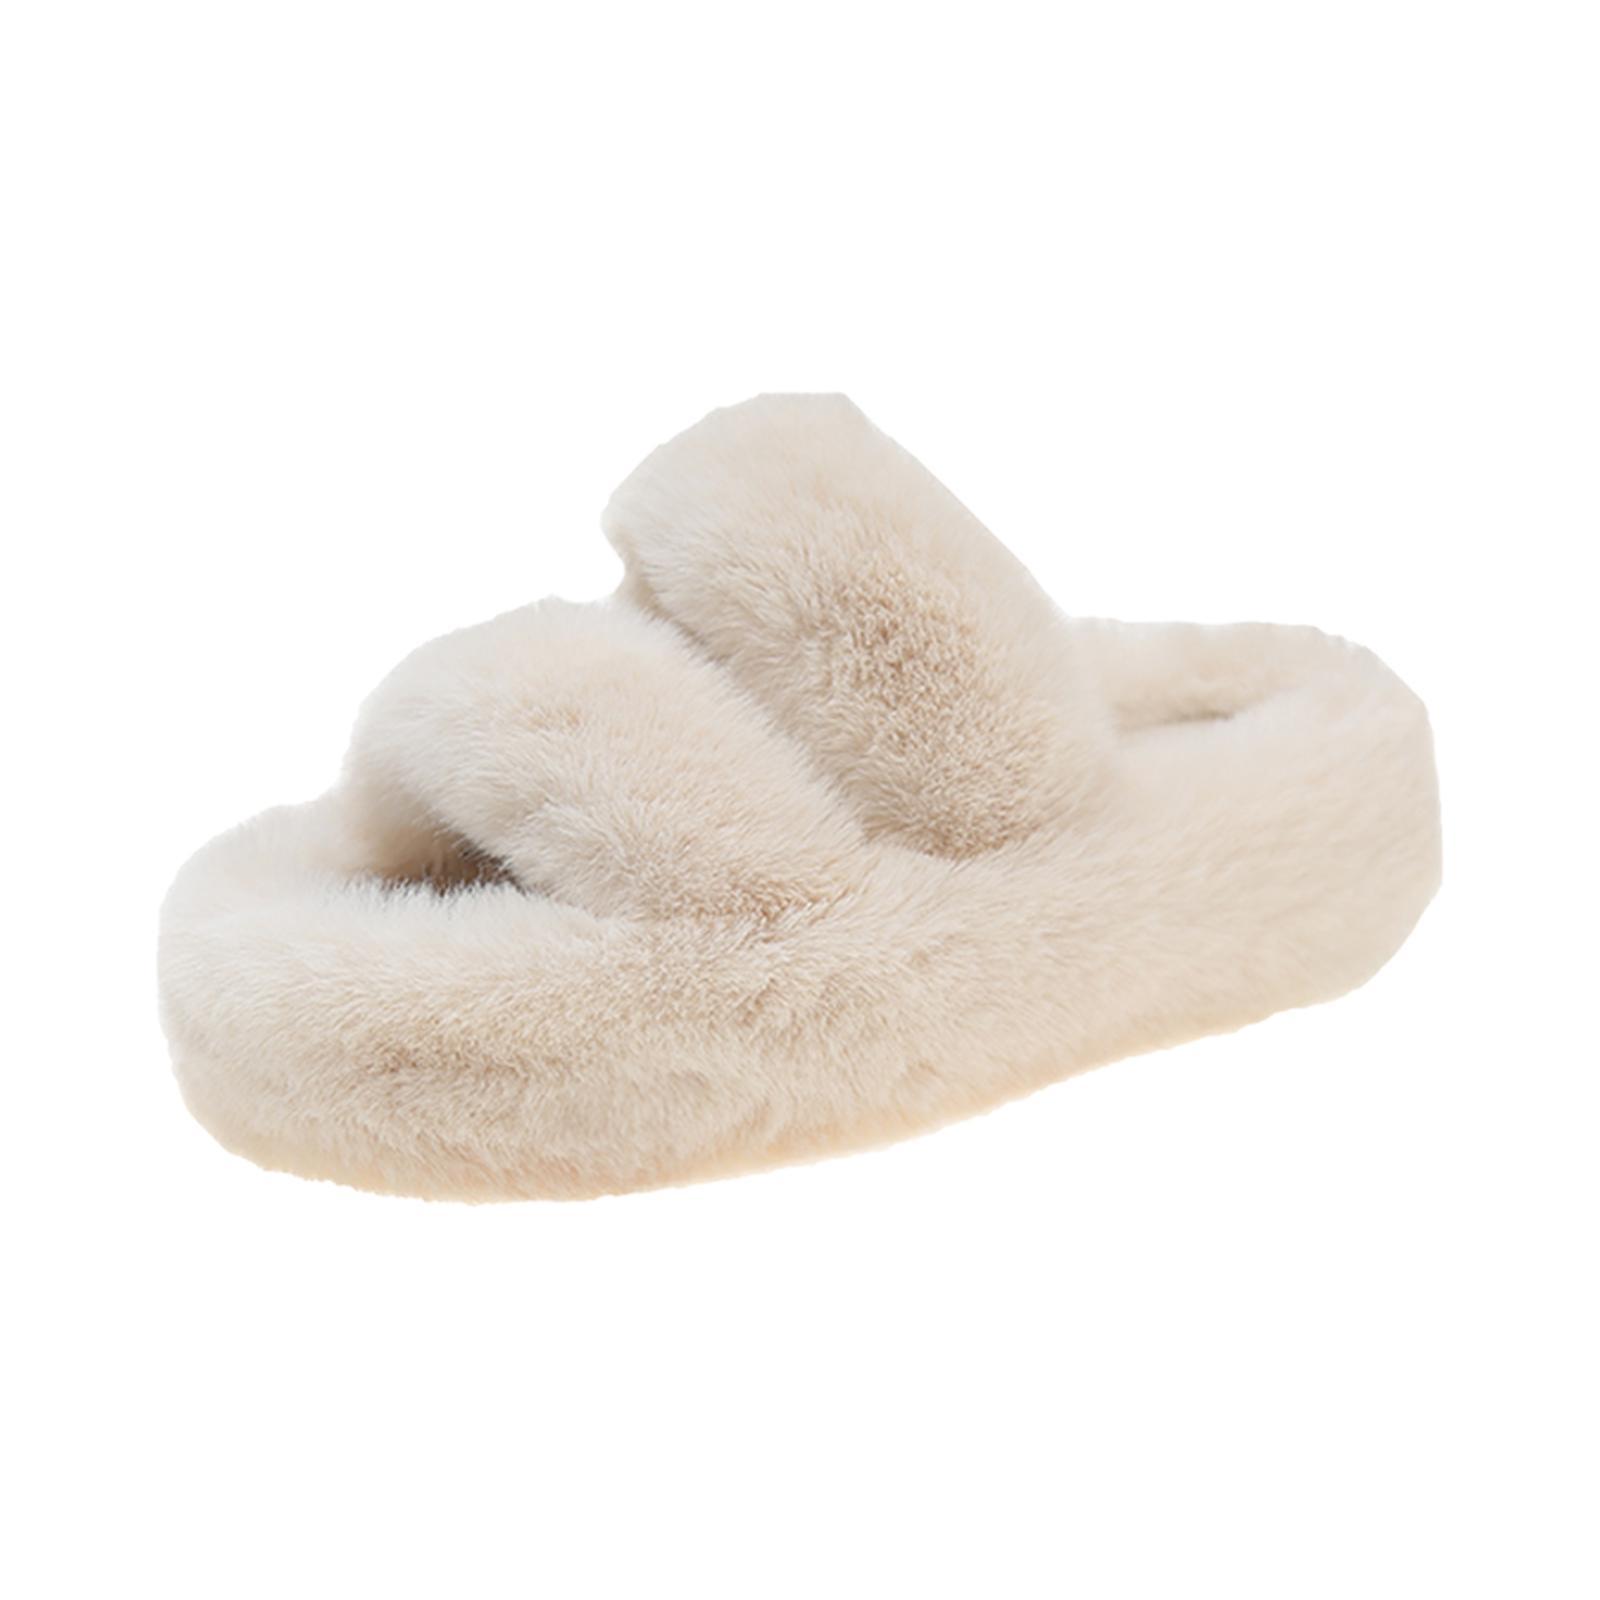 Women Fuzzy Slippers Plush House Shoes with Two Band Fashion Anti Slip Thick Sole Open Toe Slide Slippers Winter Slippers for Bedroom